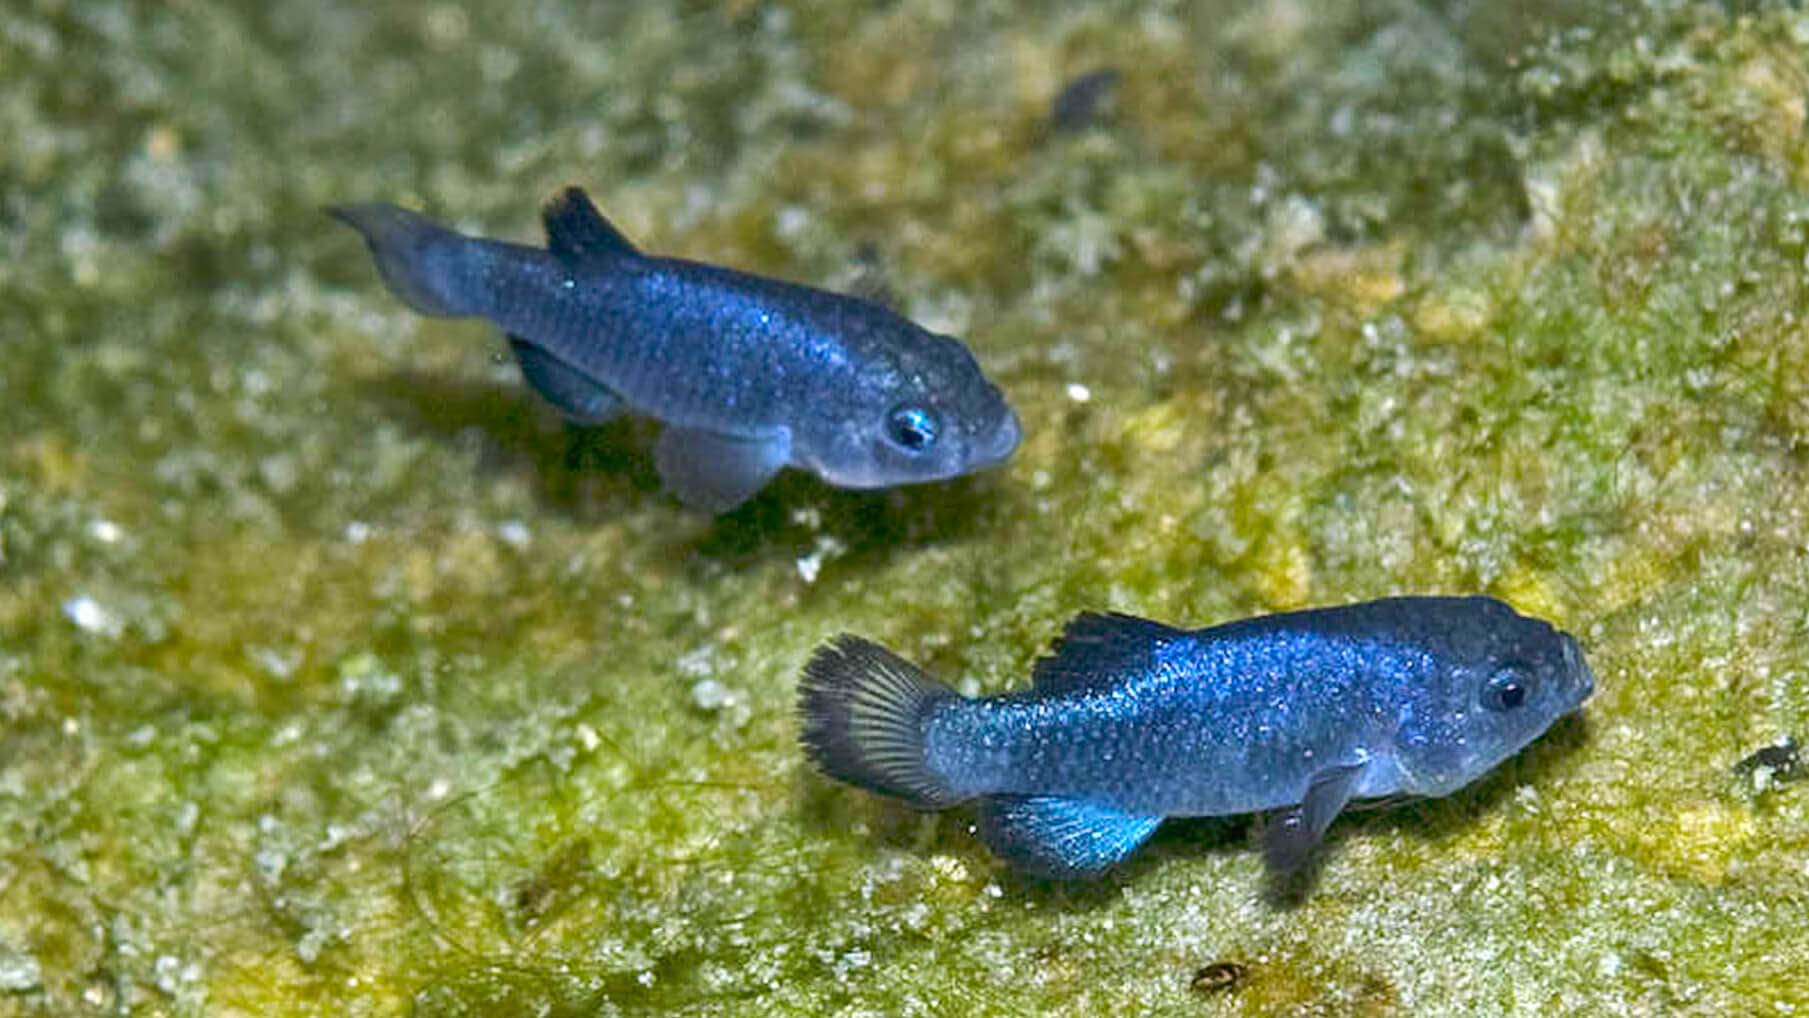 Two blue small Devils Hole pupfish swimming in the water